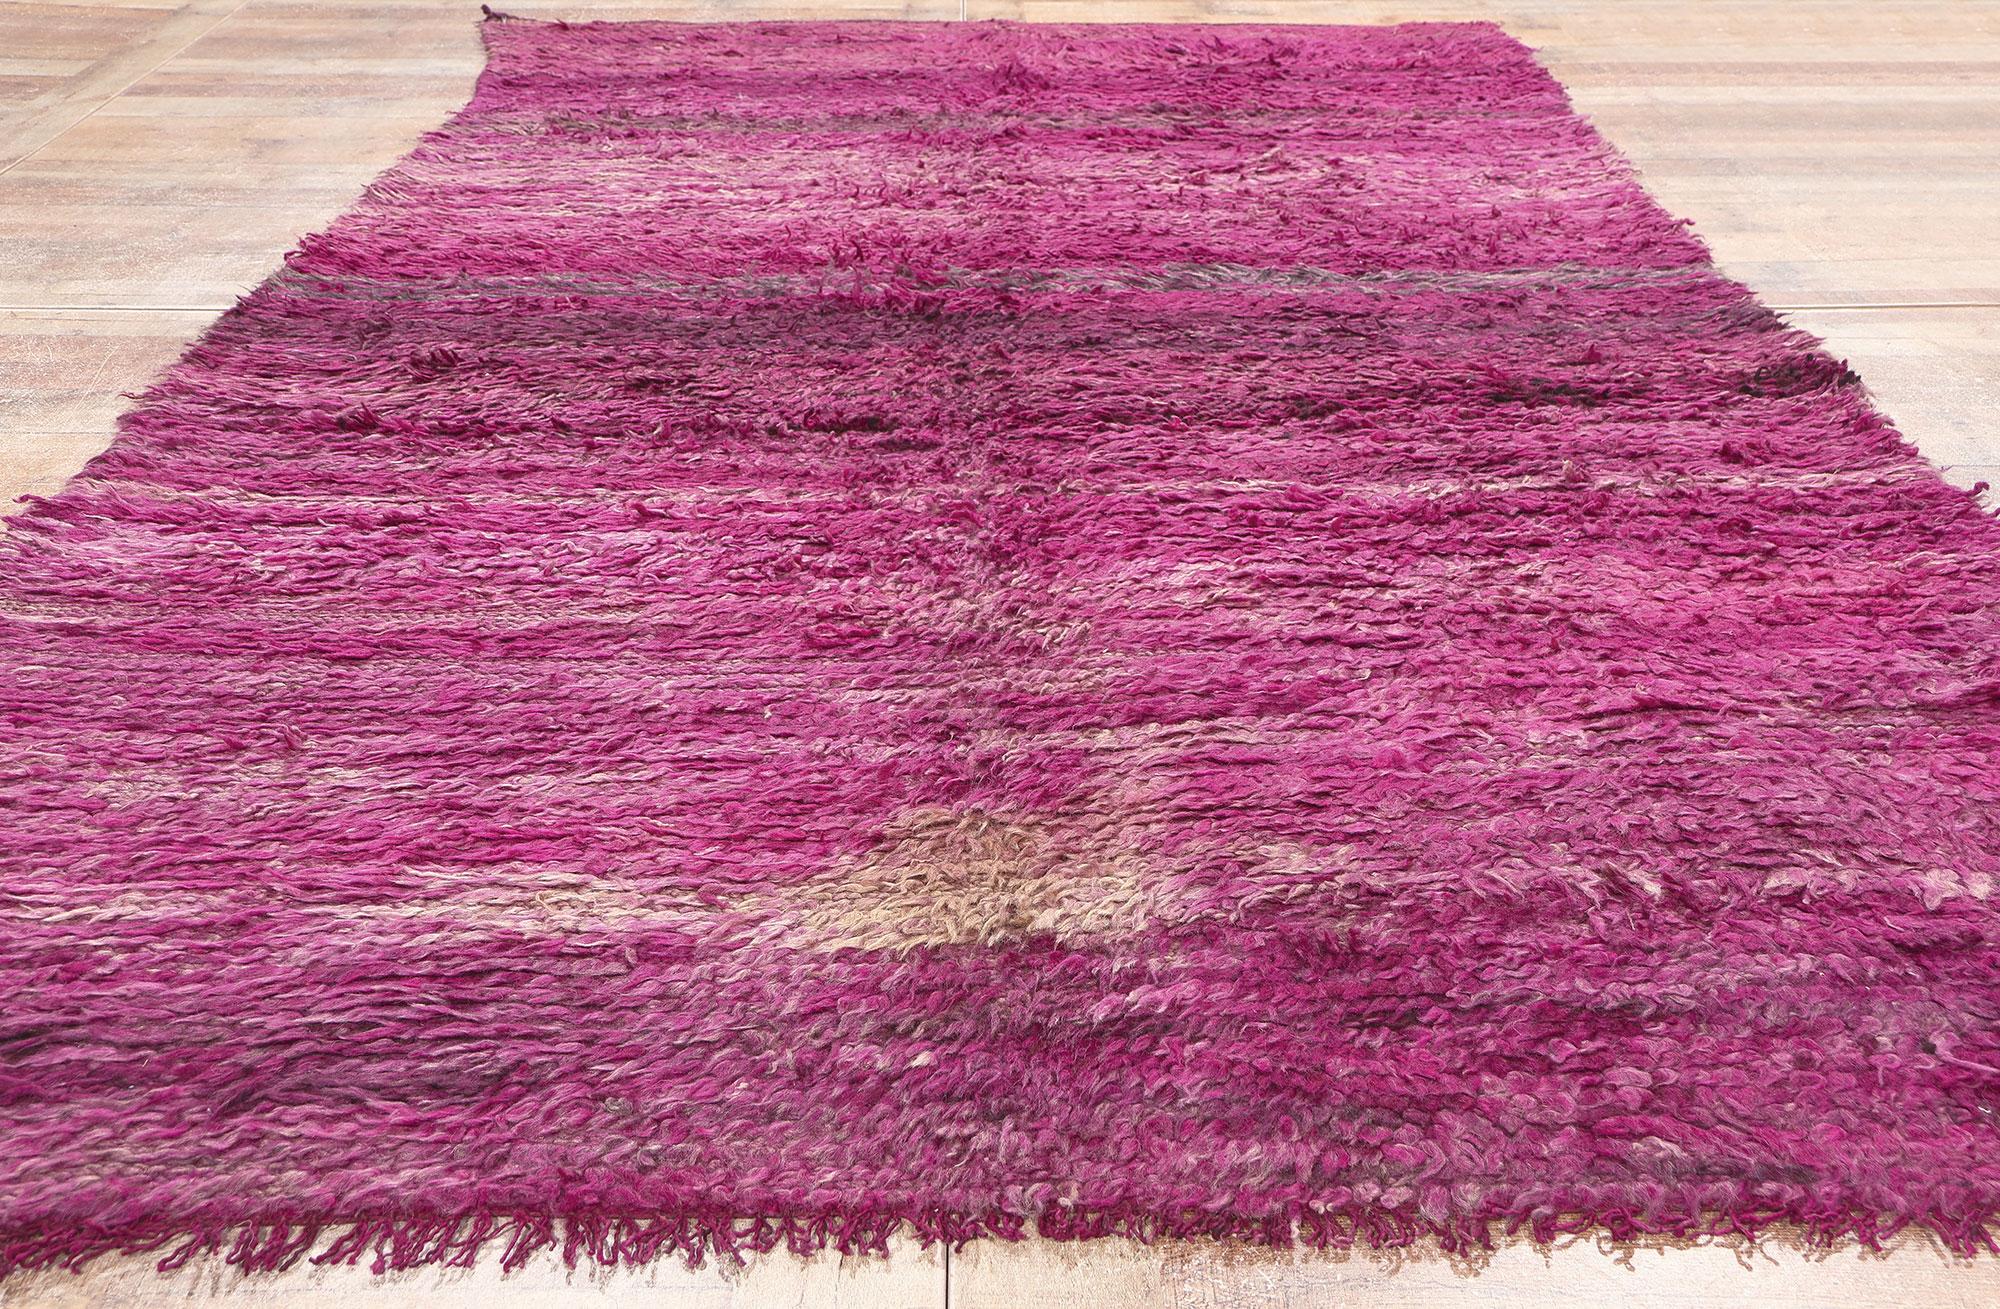 Reversible Vintage Beni MGuild Moroccan Rug, Boho Meets Abstract Expressionism For Sale 2